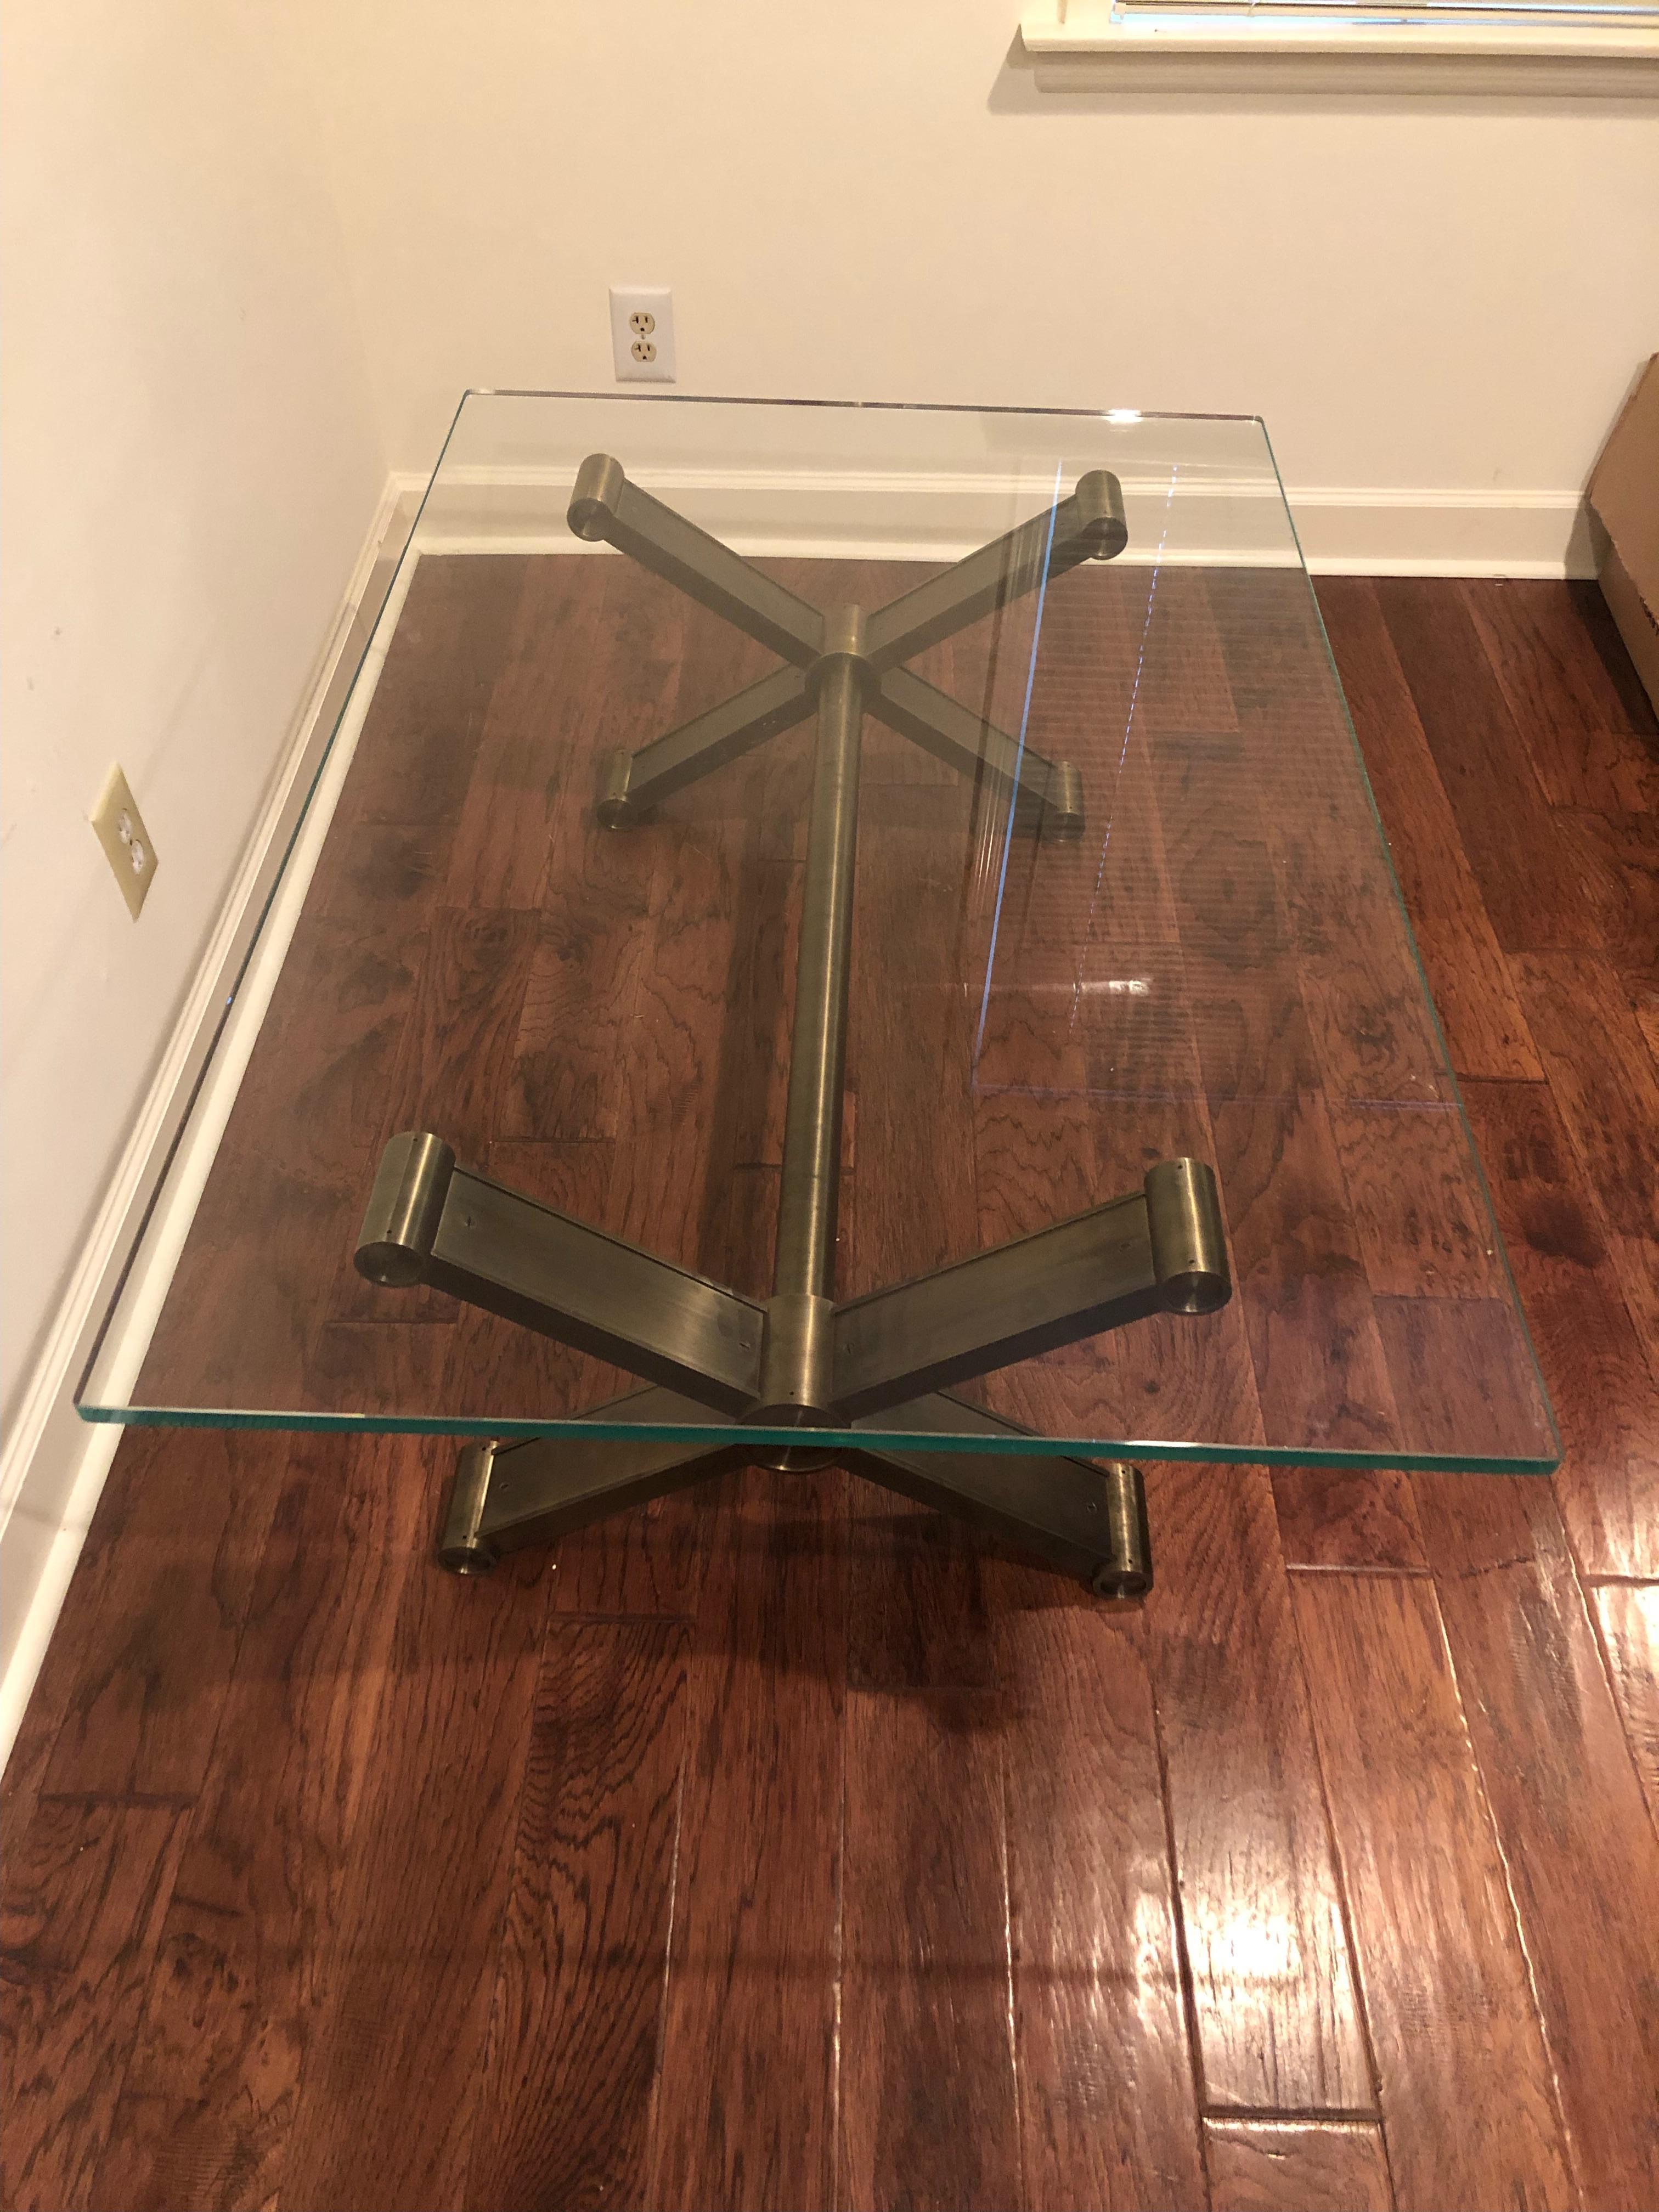 Superb architecturally impressive industrial modern coffee table having heavy weight steel tubular base and .75 thick rectangular glass top. 

 Base is 44 x 23.5.